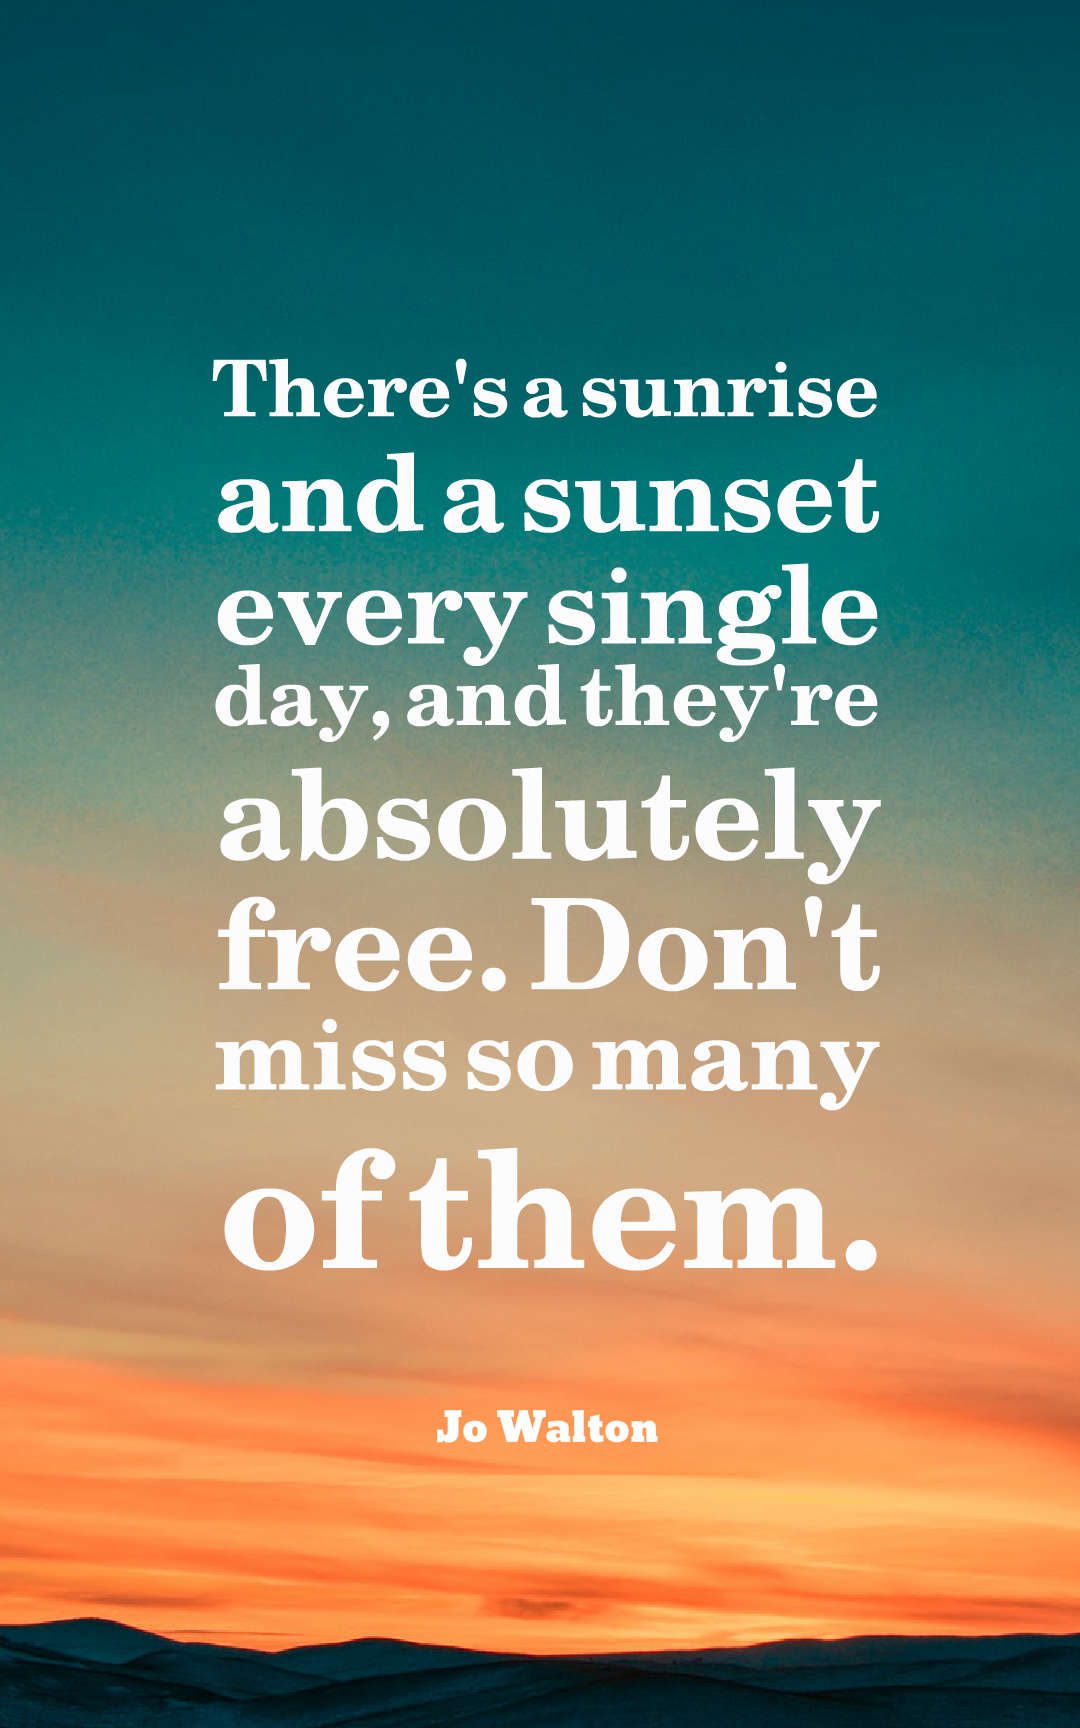 There's a sunrise and a sunset every single day, and they're absolutely free. Don't miss so many of them.